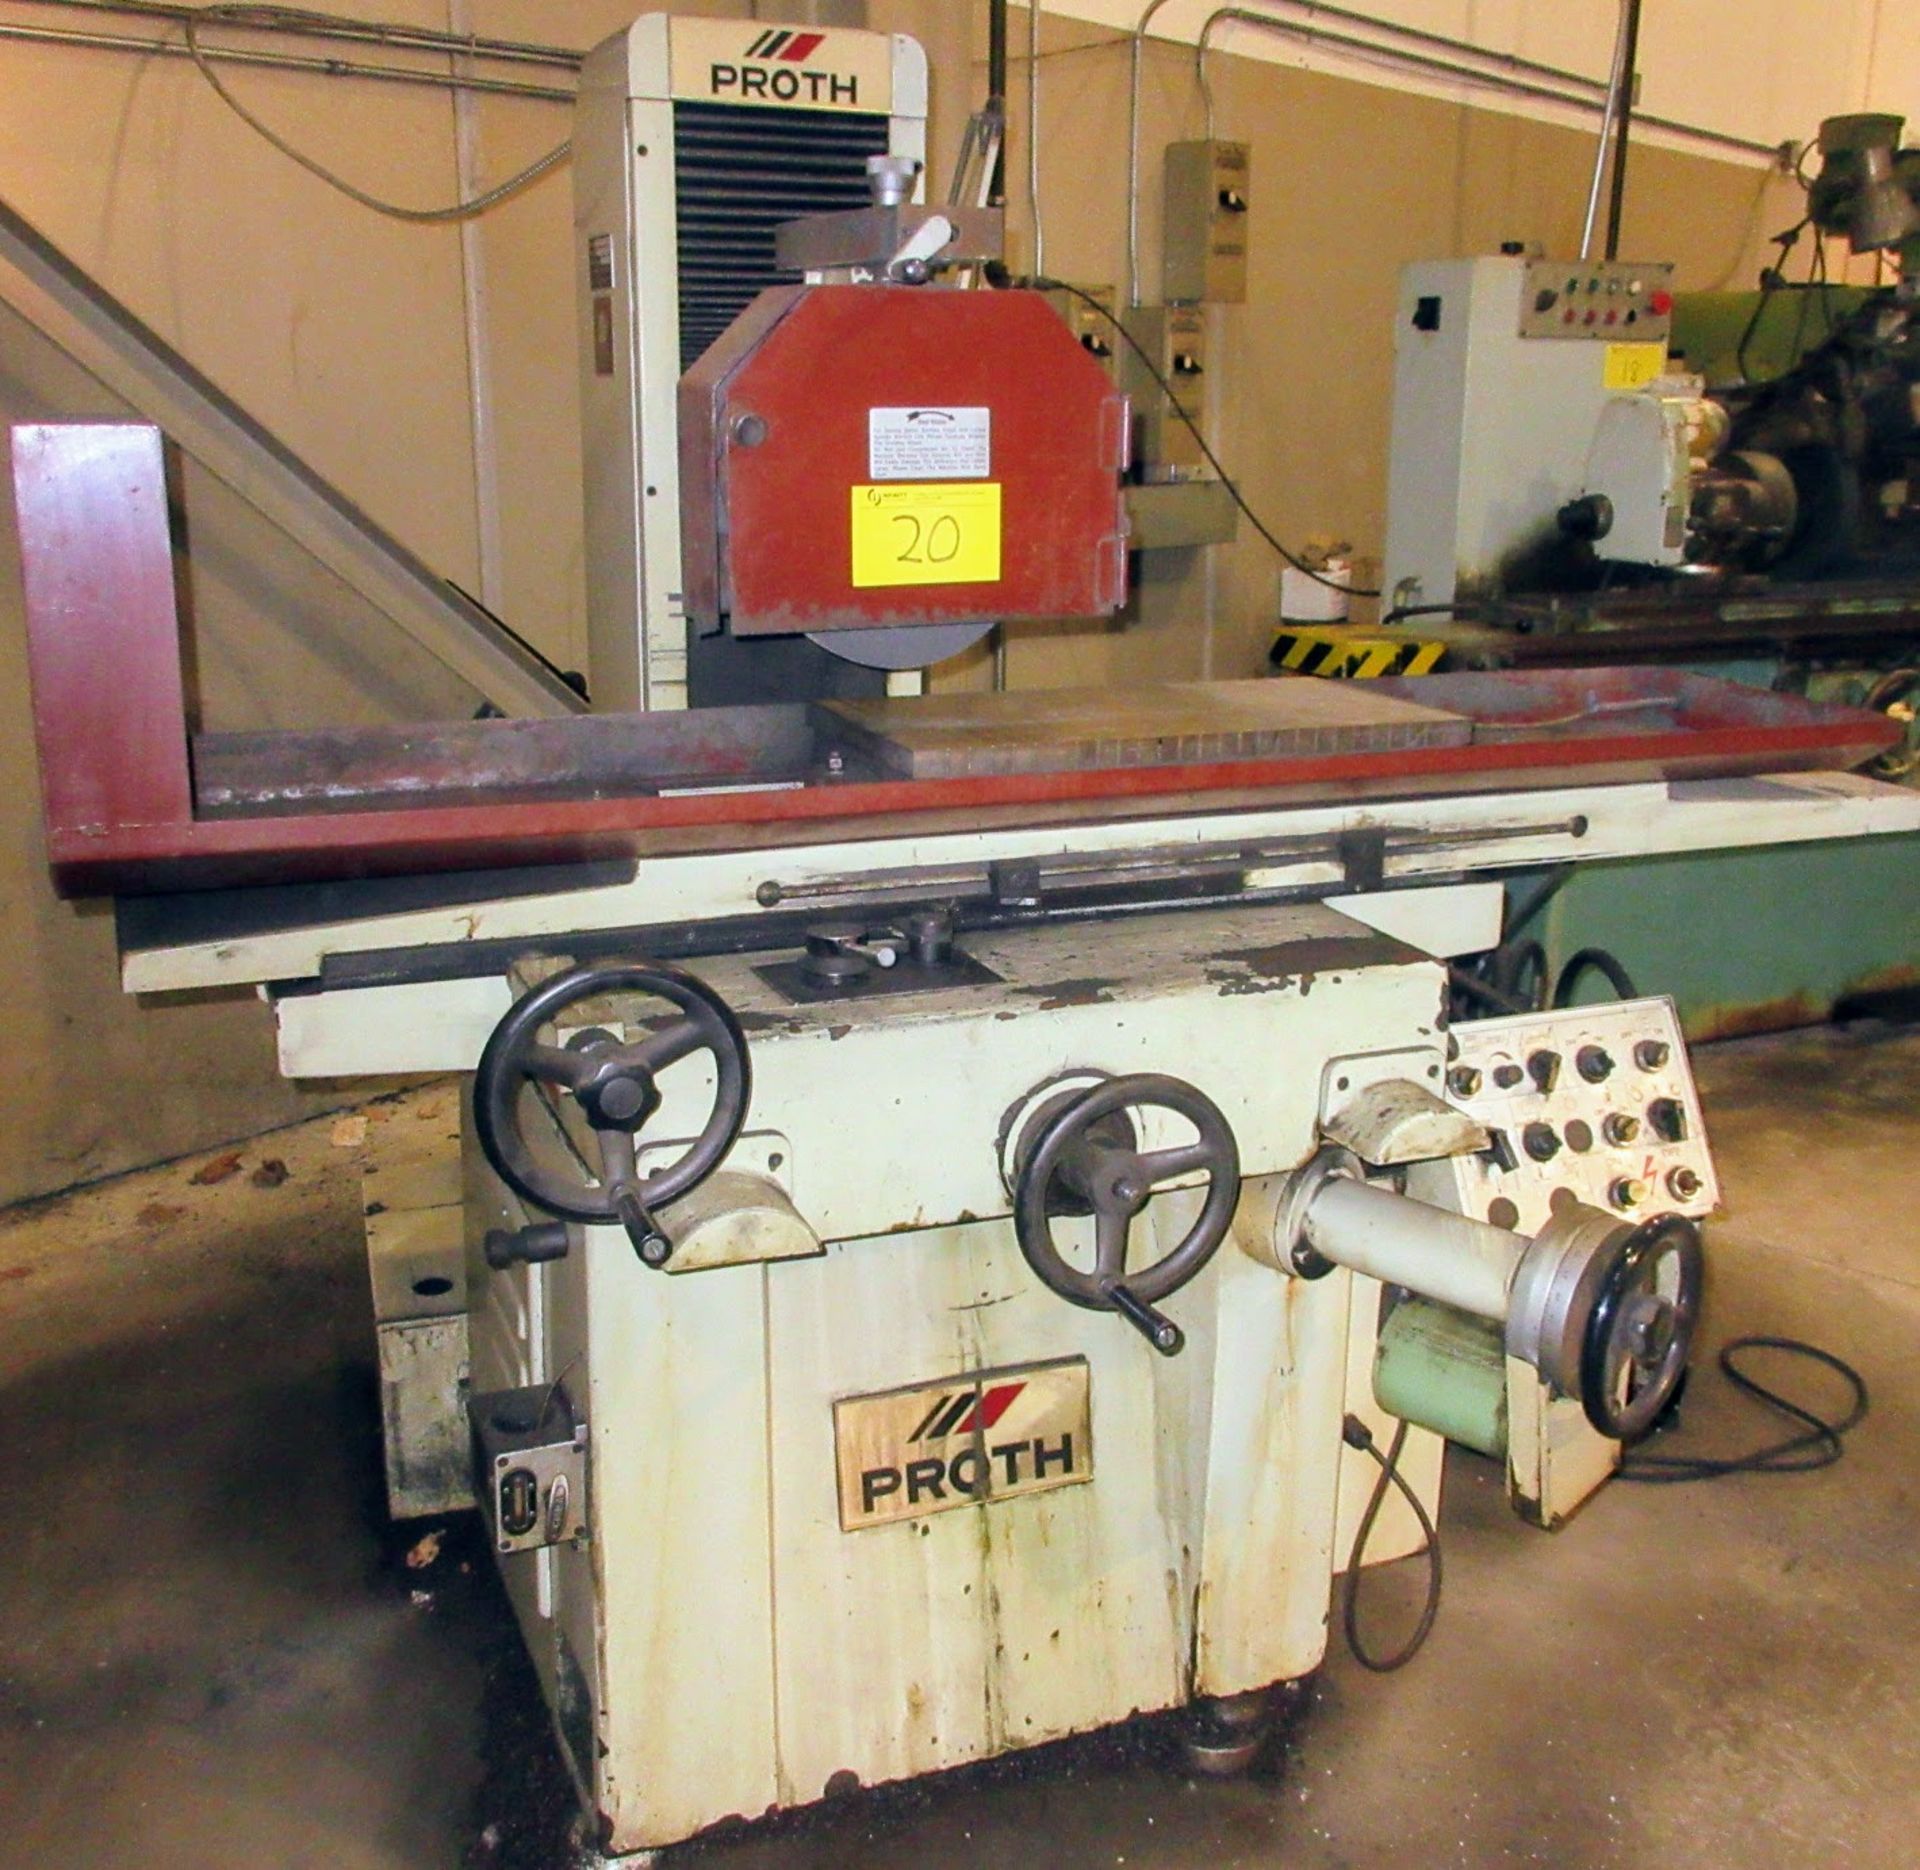 PROTH PSGS-3060AH SURFACE GRINDER, S/N 903209-1, 12” X 24” MAGNETIC CHUCK - Image 4 of 11